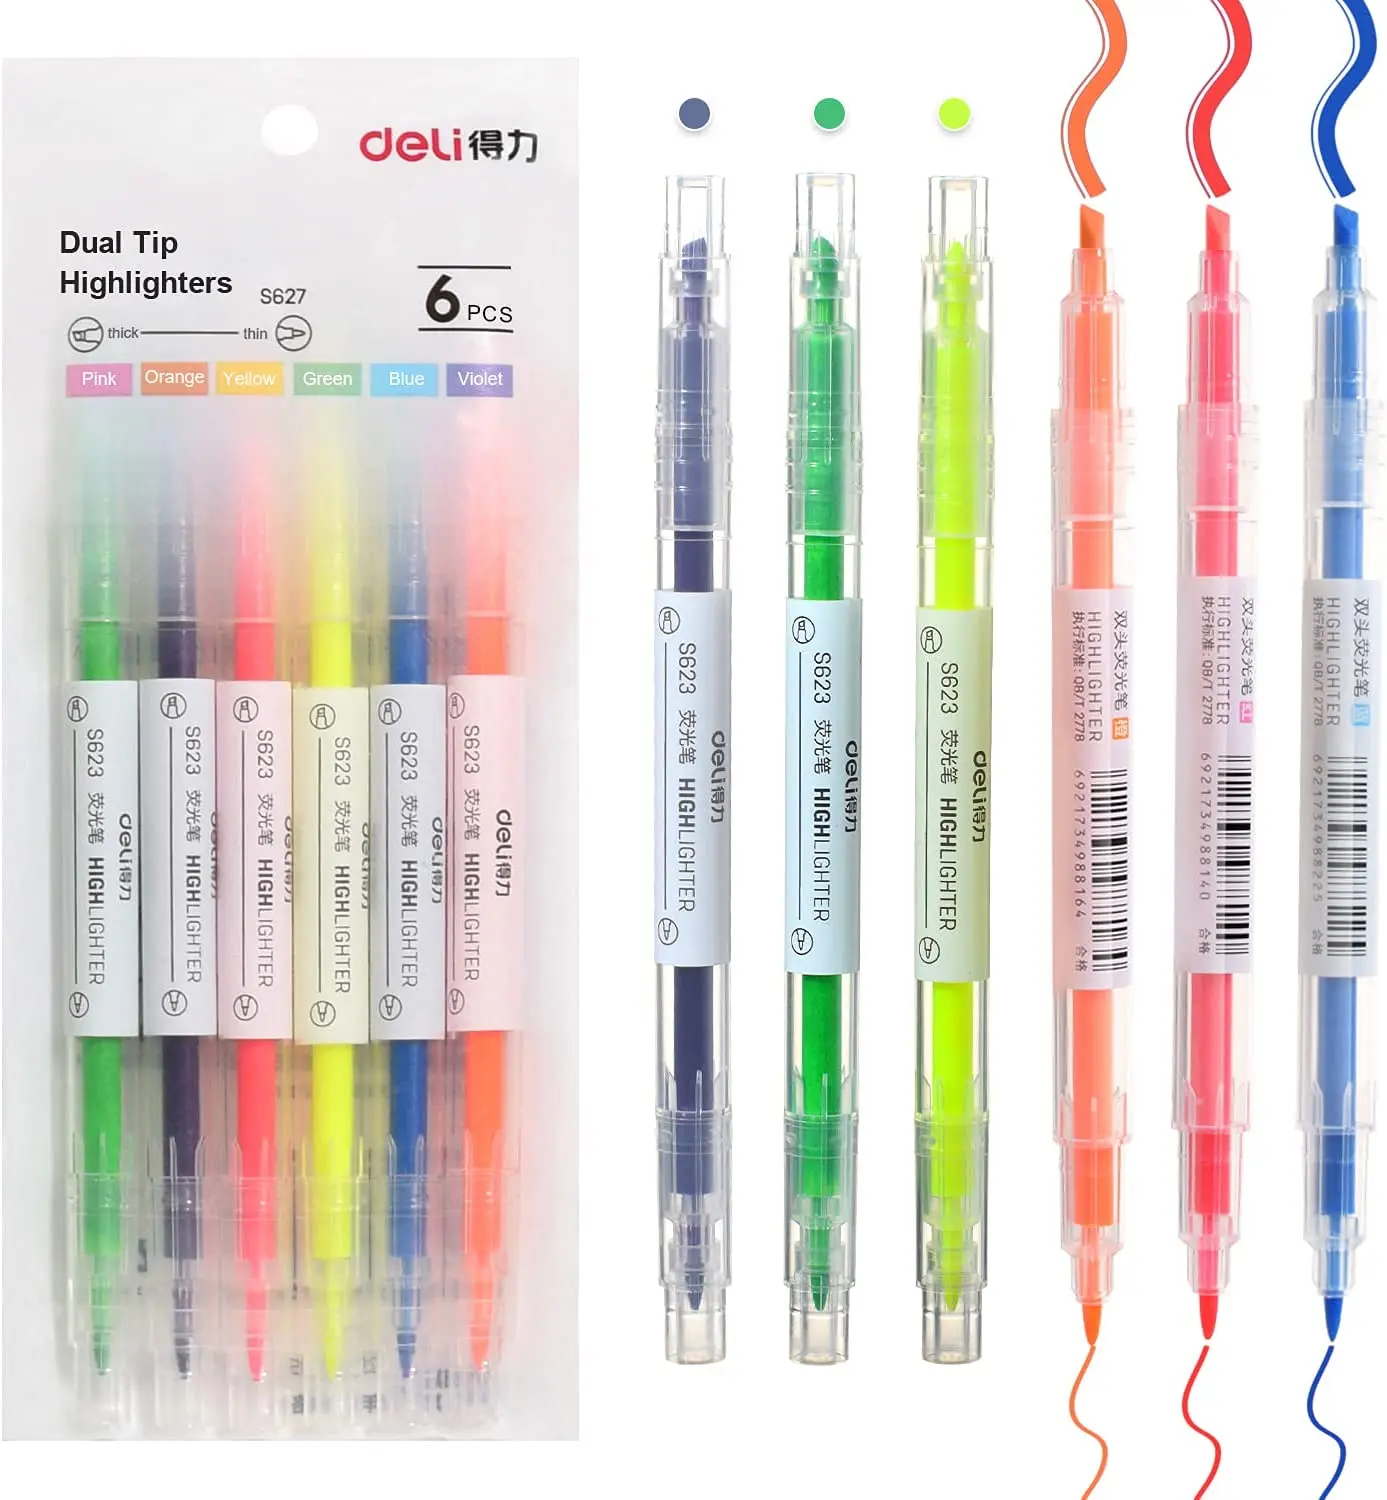 6 Pack Dual Tips Highlighters, 6 Assorted Colors, Needle and Chisel Tip, Bible Pens No Bleed Through, No Smear Fast Dry Highligh